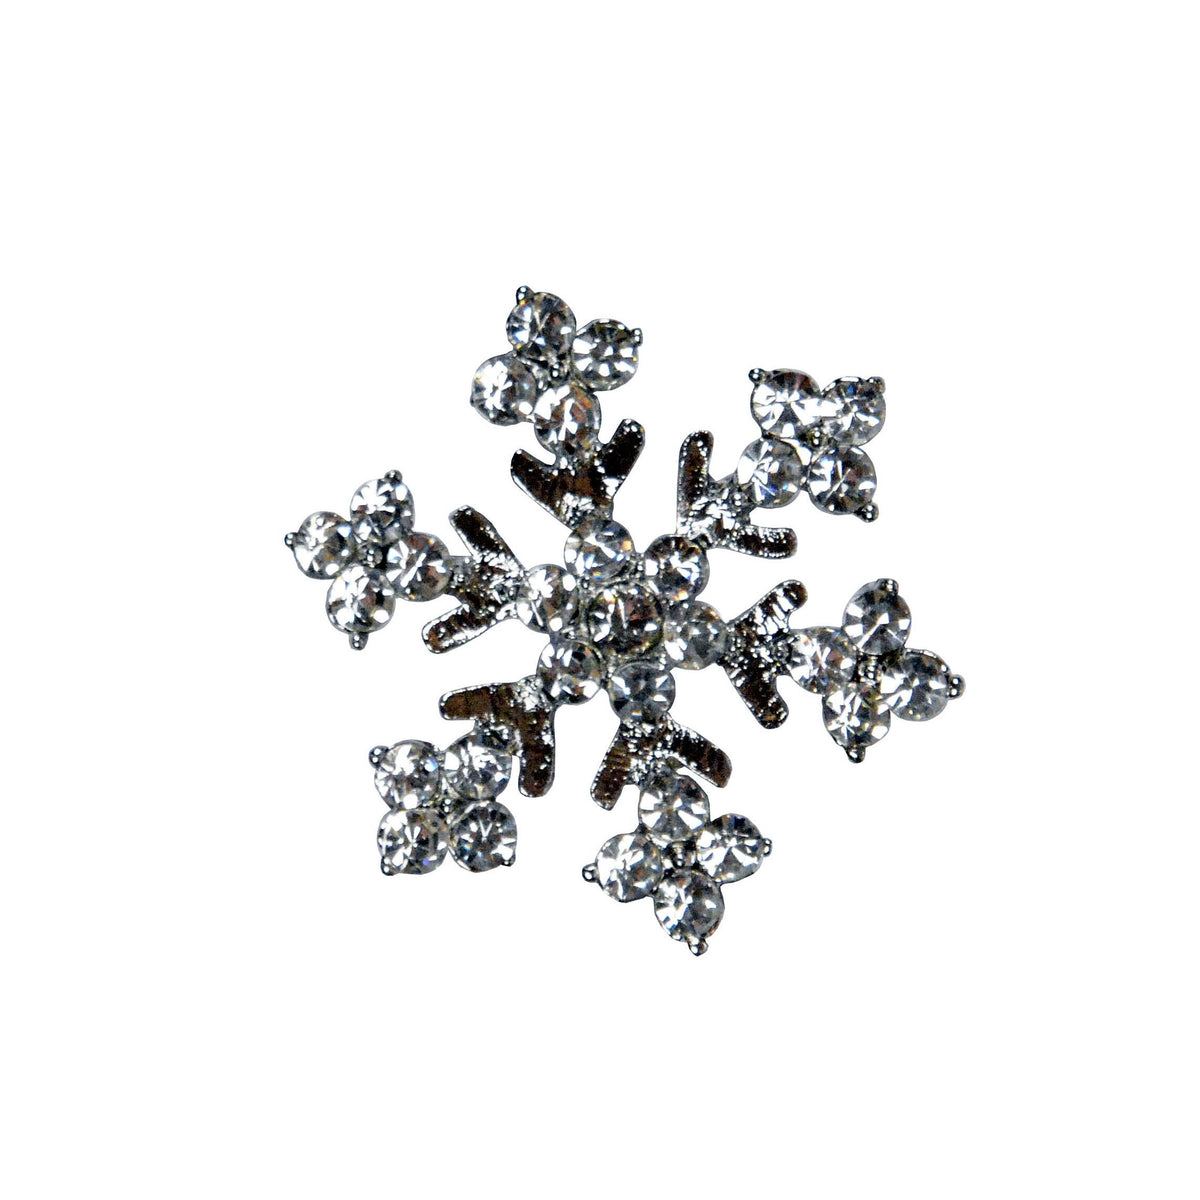 Rhinestone Brooches - Snowflakes (One Small Left!)